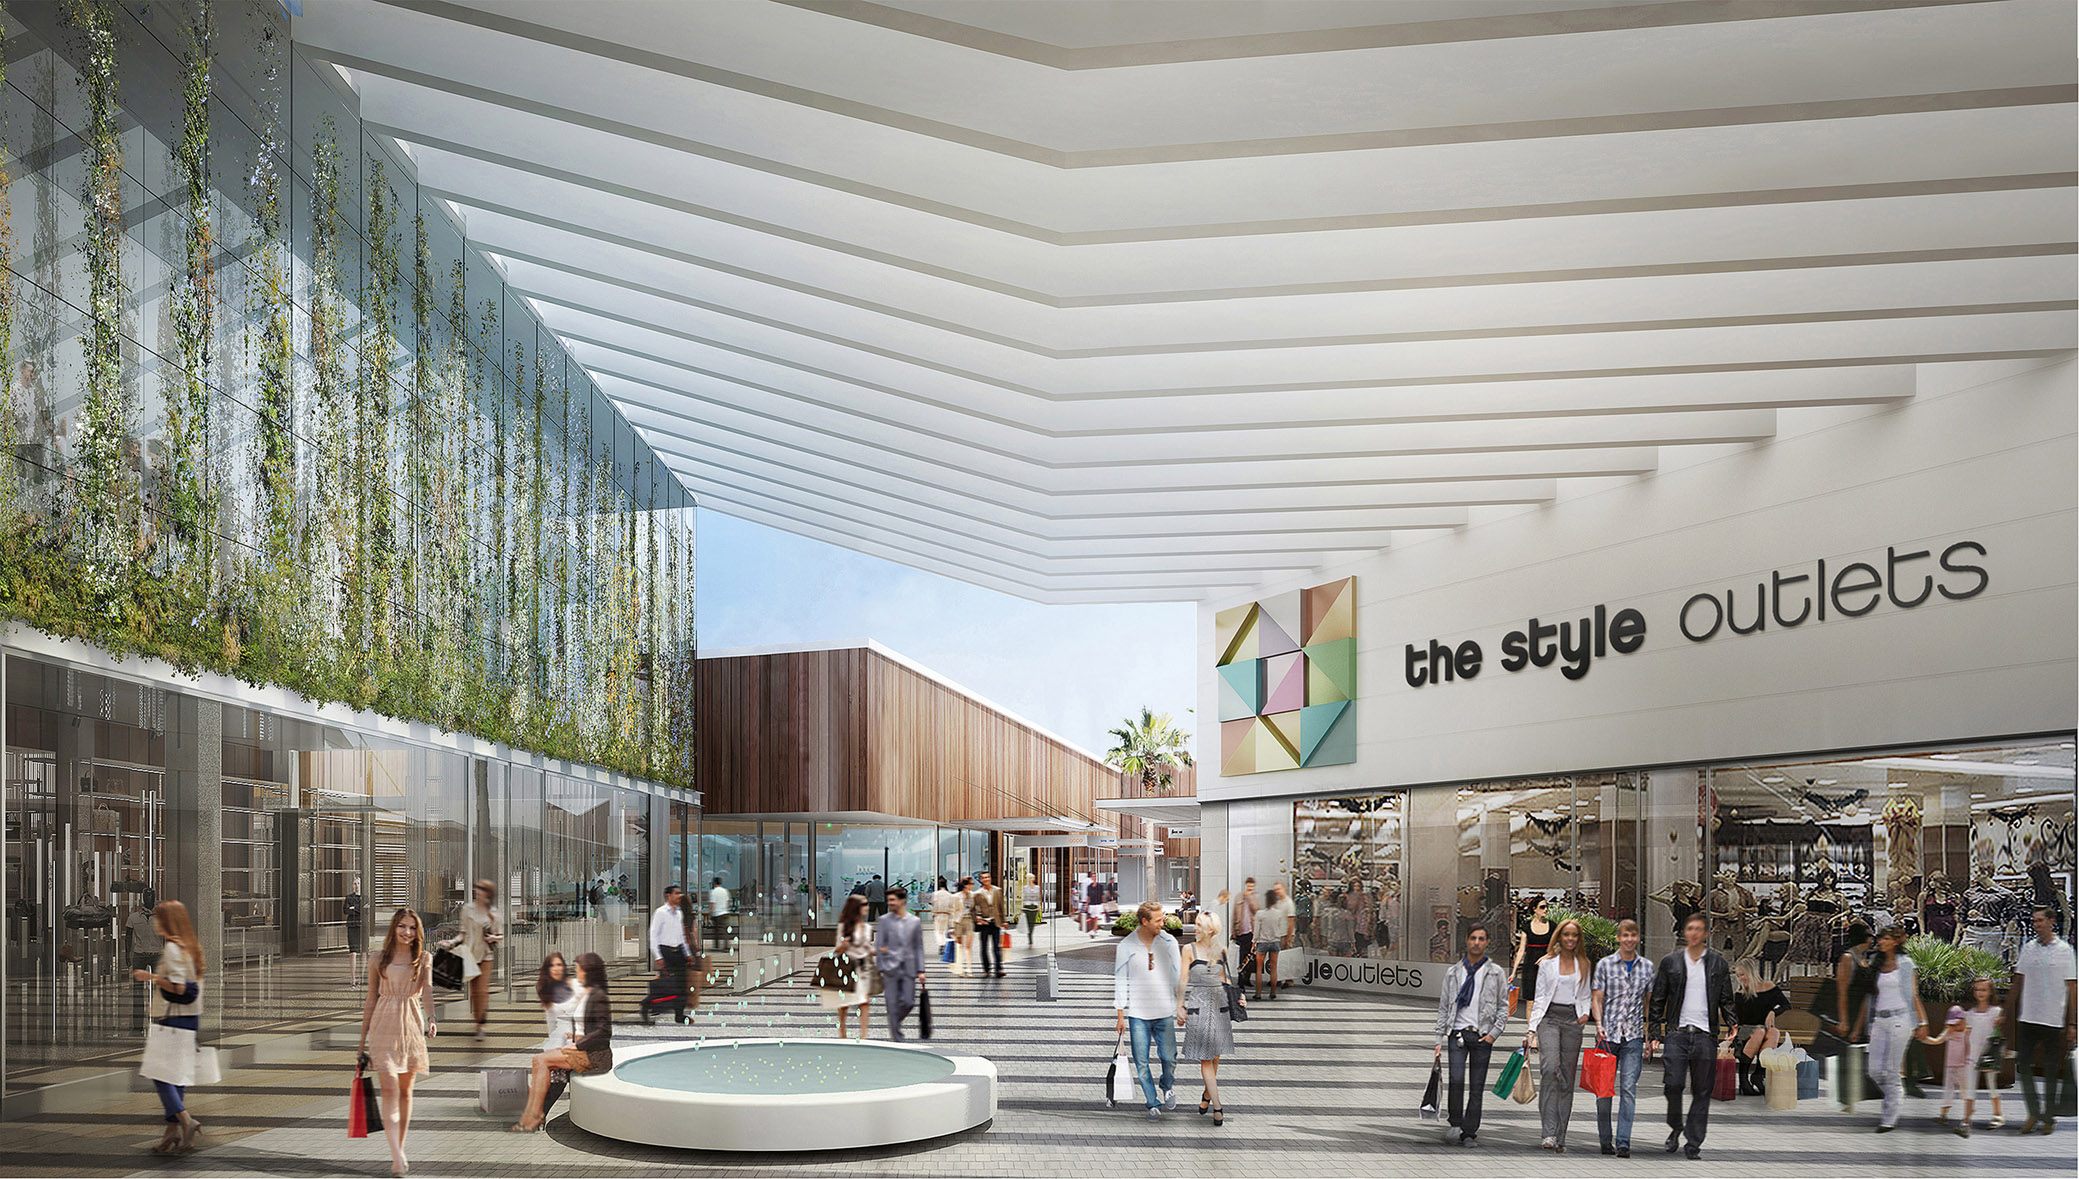 Viladecans_the_style_outlets_(ar)